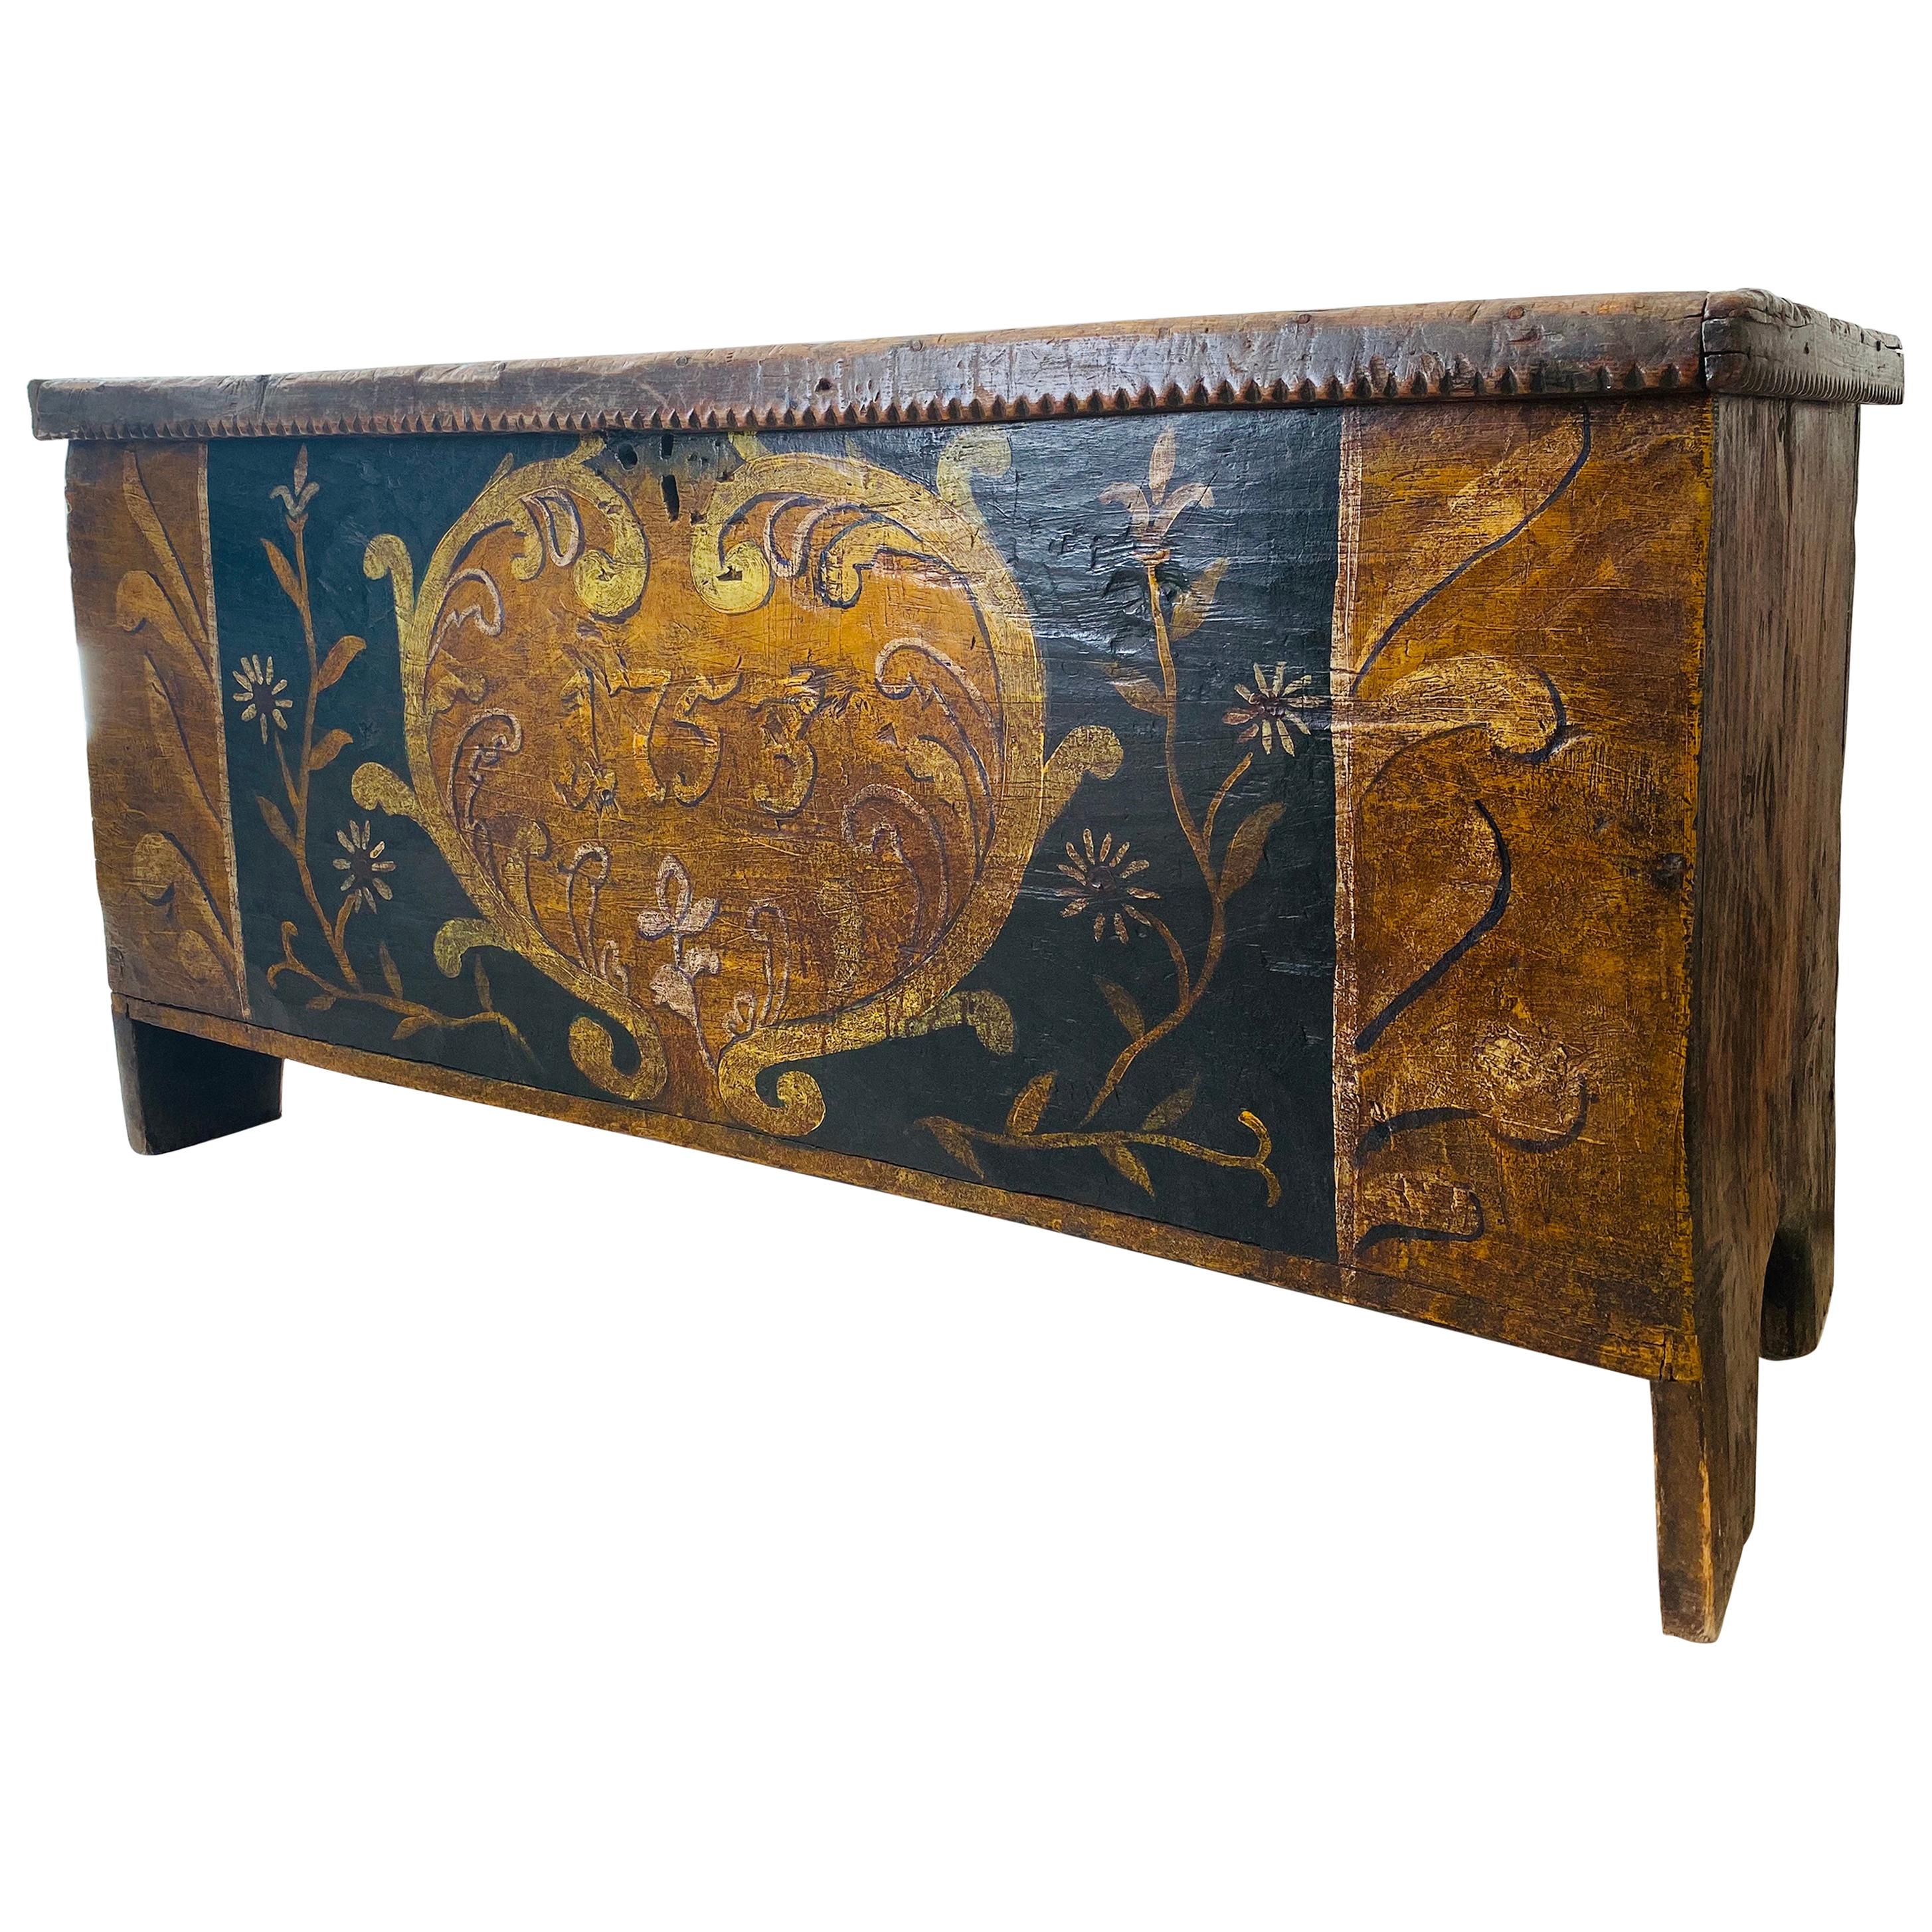 Gorgeous Antique Italian Wooden Case, 18th Century 'Year 1753' For Sale